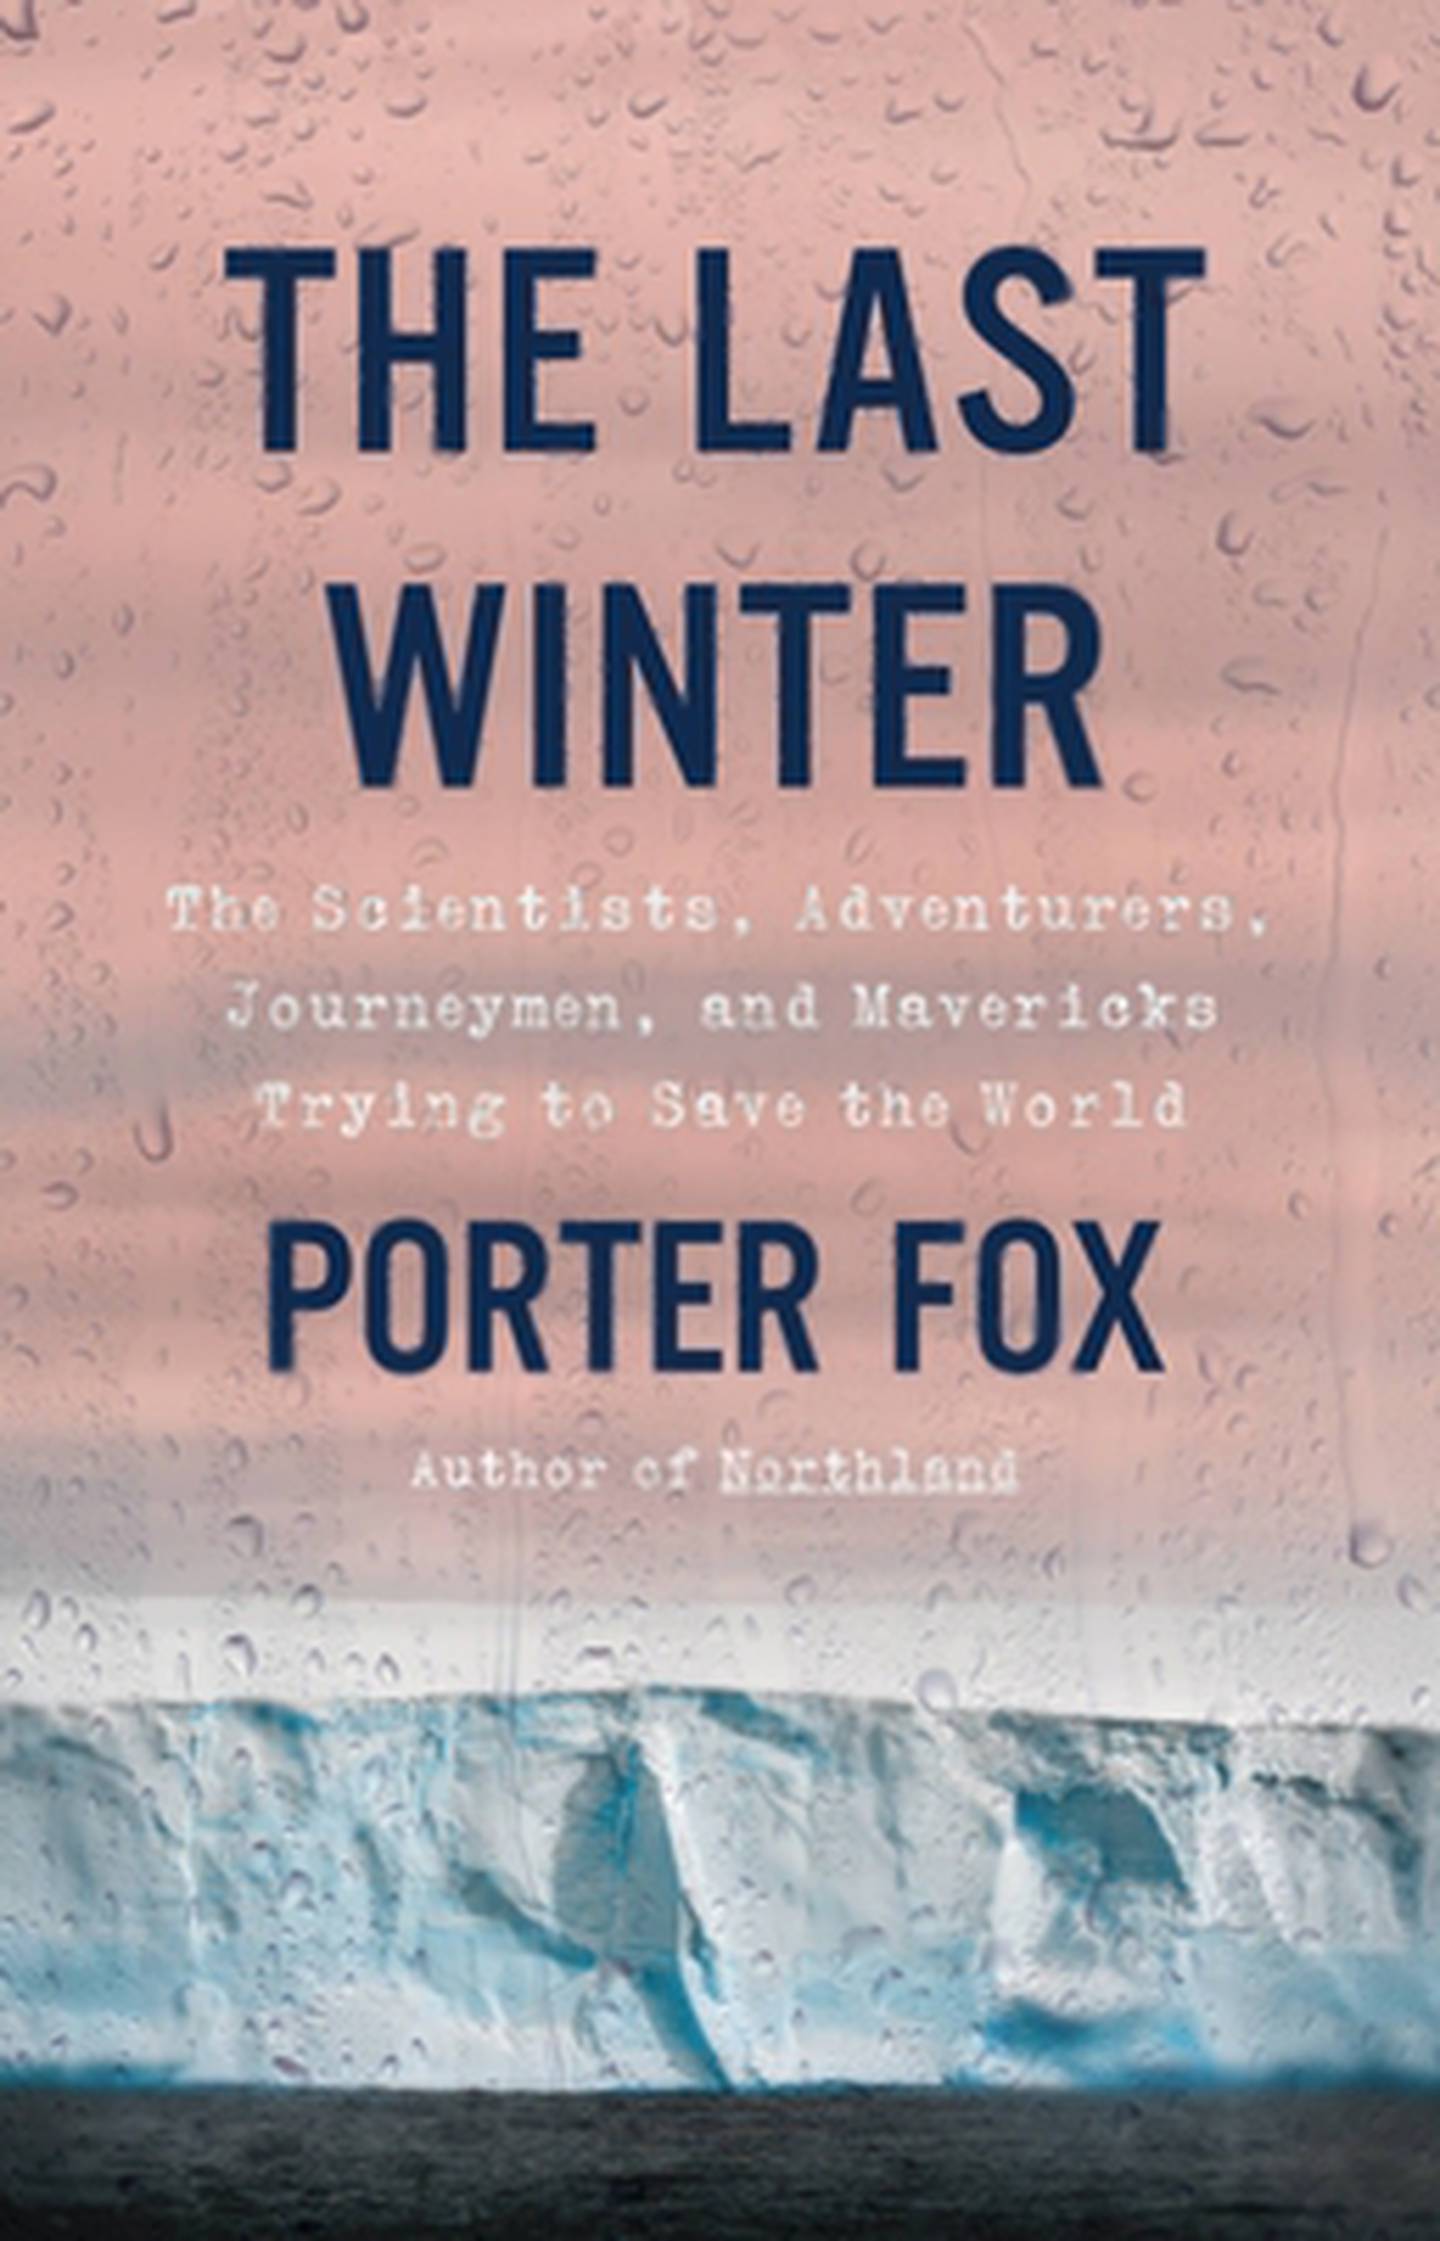 “The Last Winter: The Scientists, Adventurers, Journeymen, and Mavericks Trying to Save the World” by Porter Fox